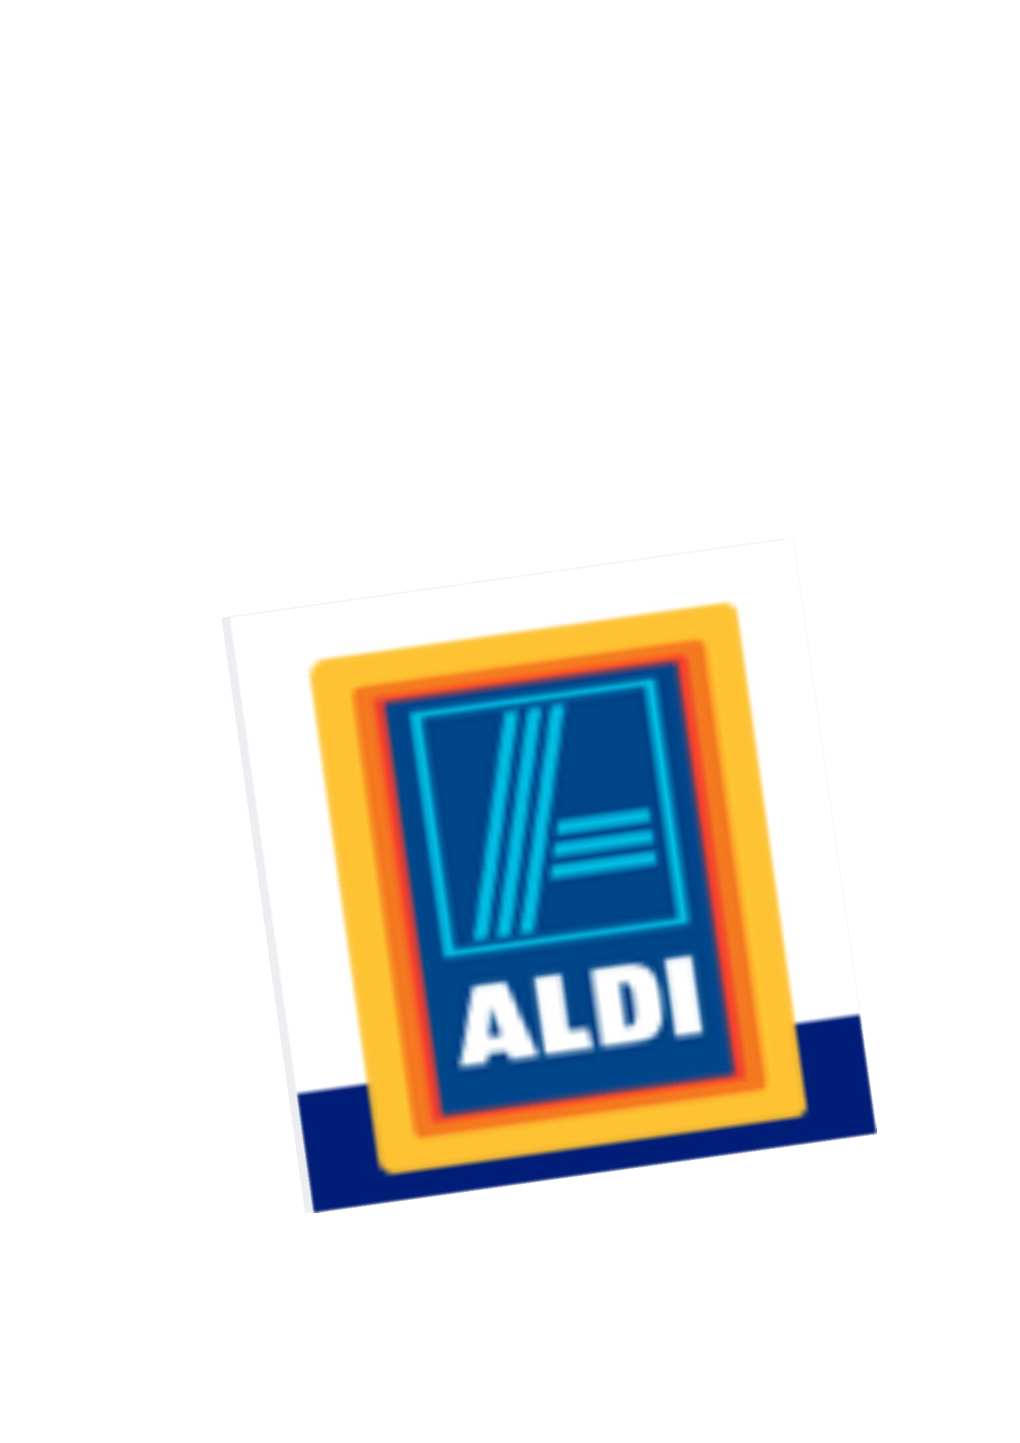 Shopping at Aldi : a Different Experience